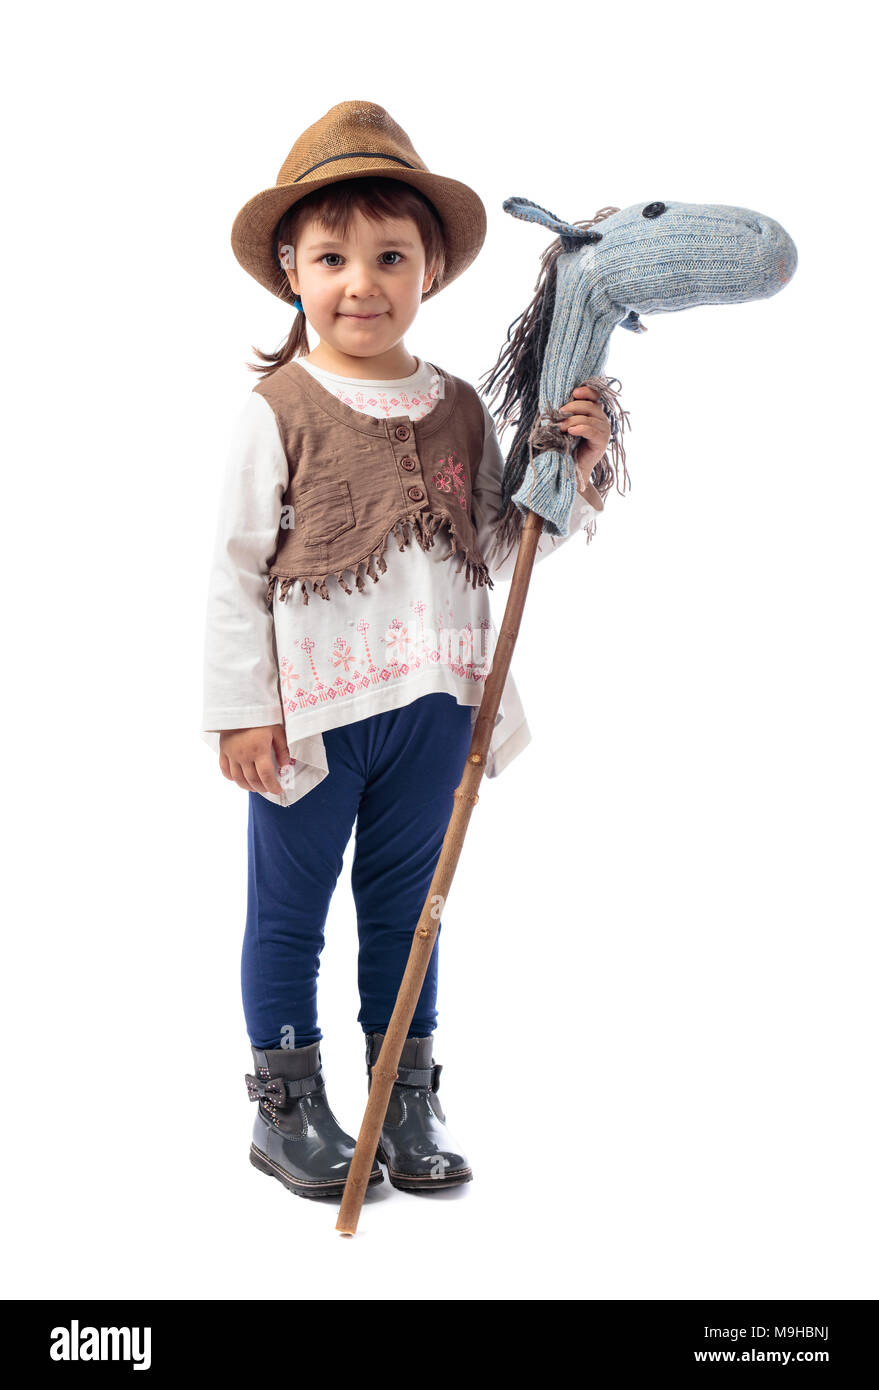 Cowgirl on white horse Cut Out Stock Images & Pictures - Alamy